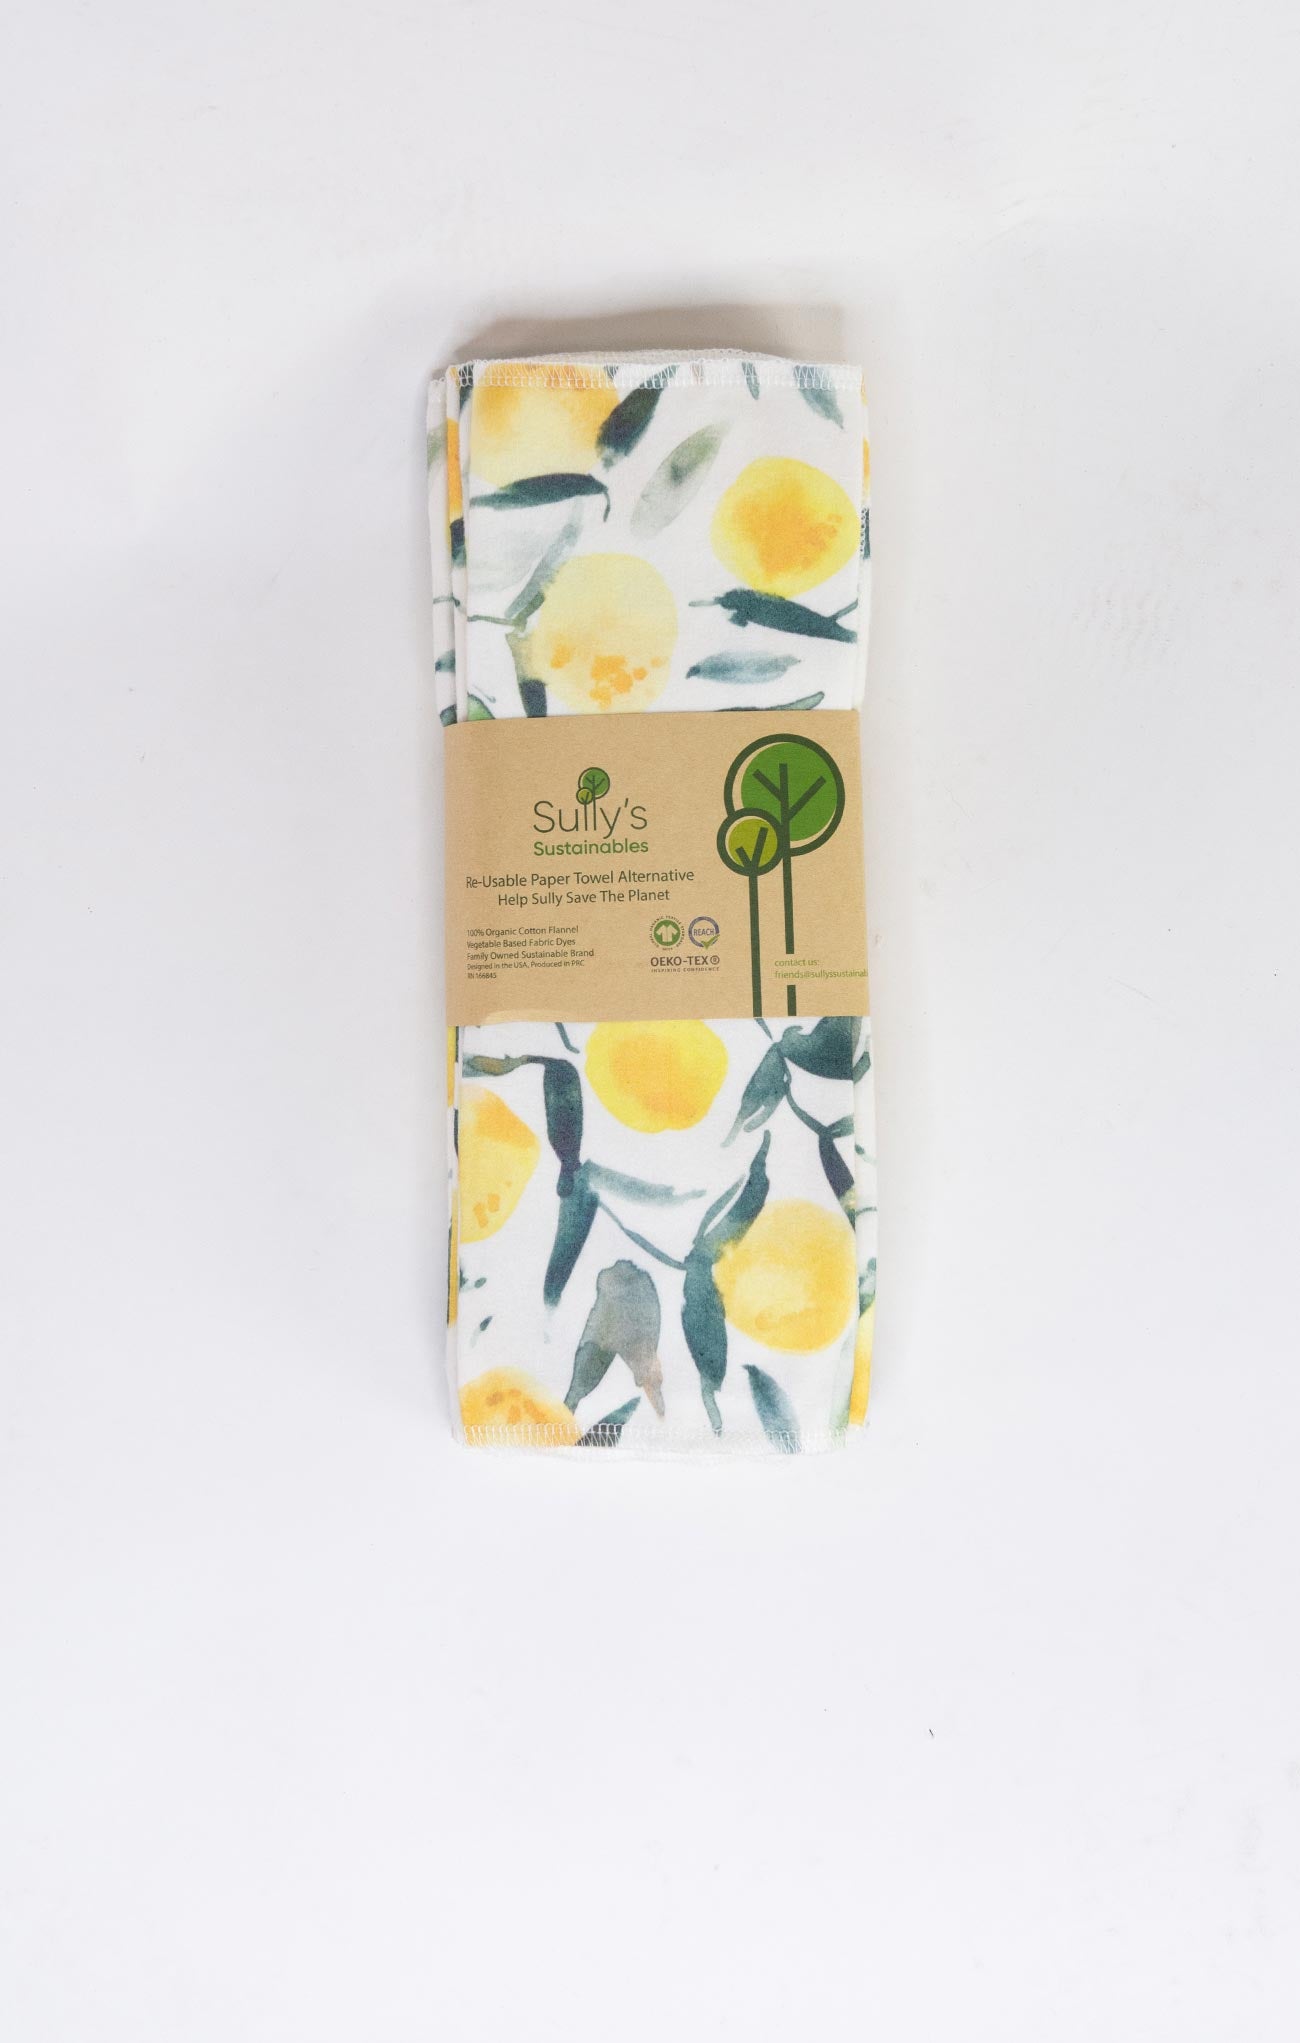 Sully's Sustainables Organic Reusable Paper Towels